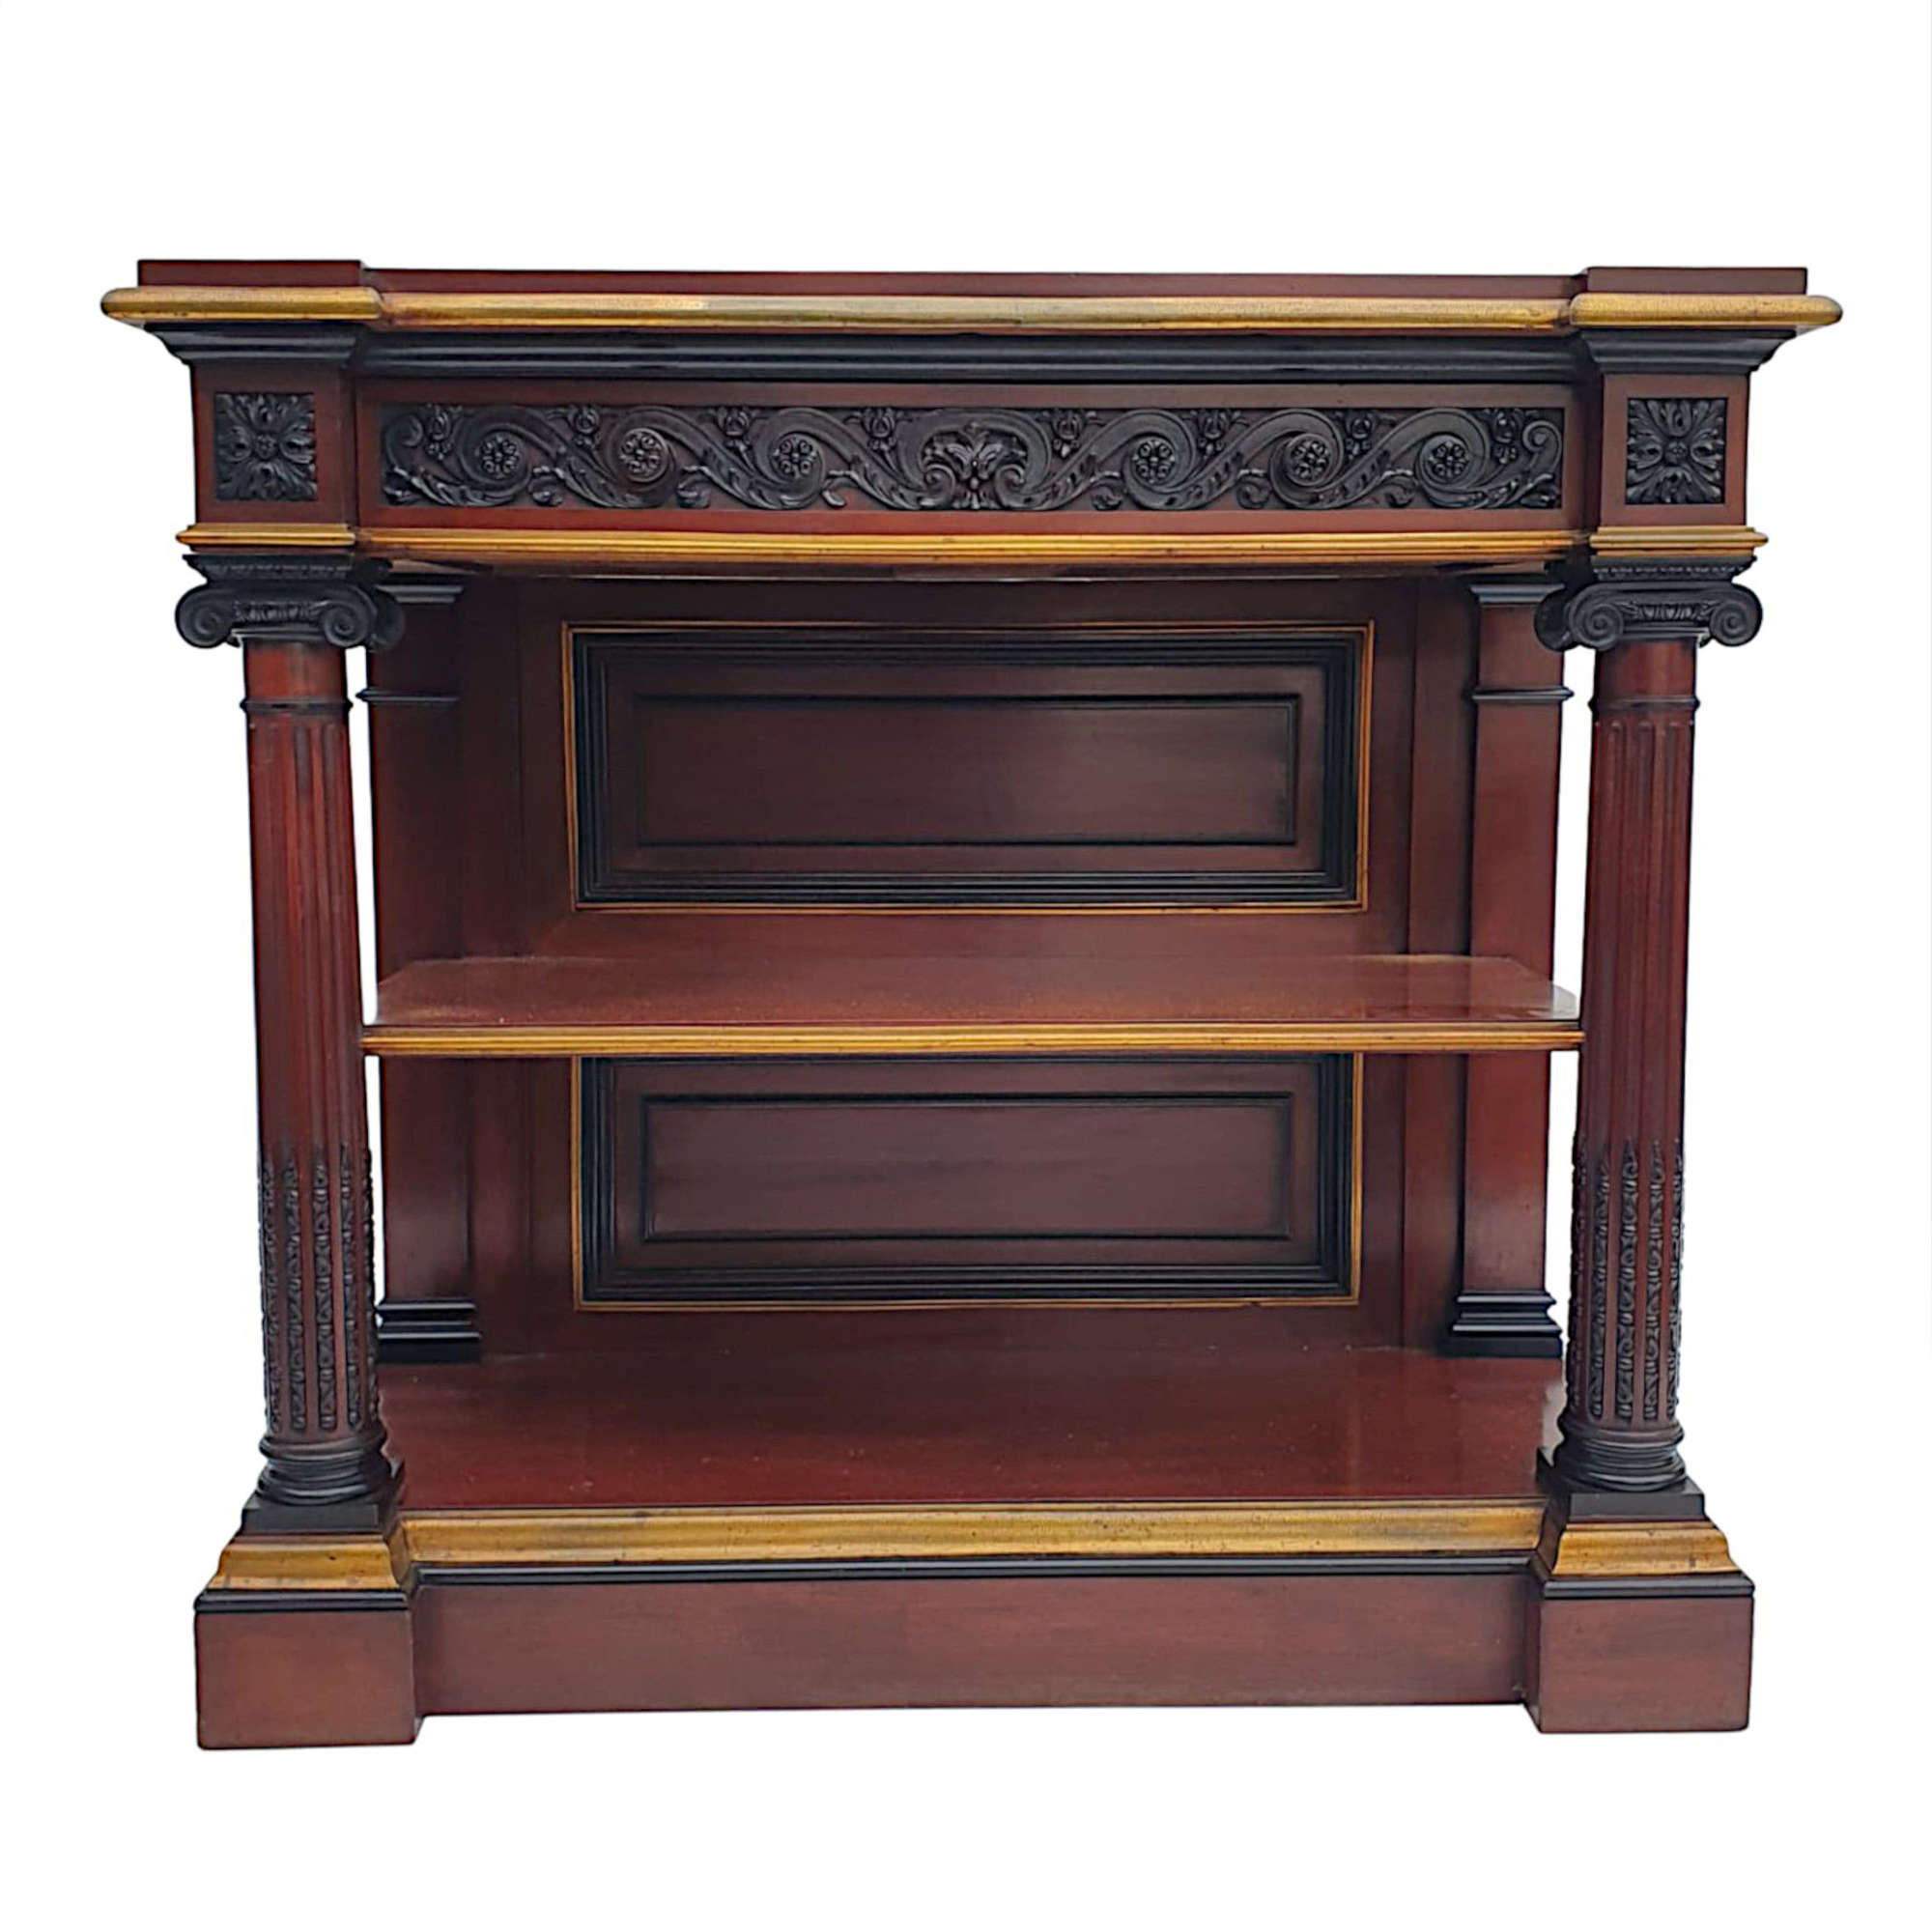 A Very Fine And Rare 19th Century Two Tier Antique Console Table